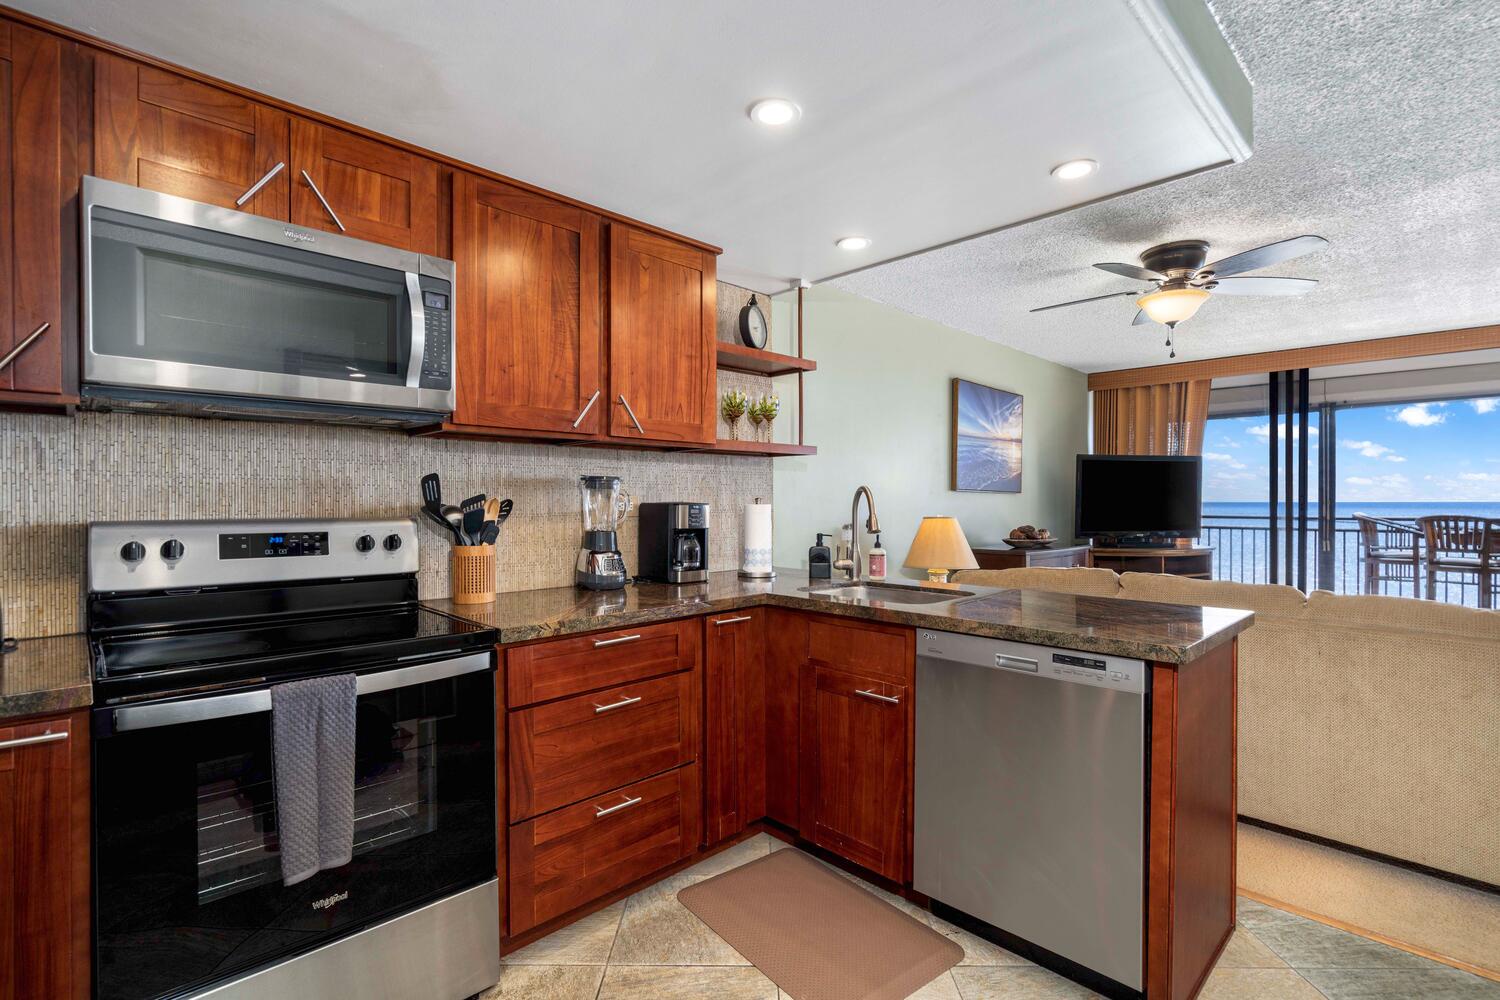 Kailua Kona Vacation Rentals, Kona Alii 302 - A coffee corner for coffee lovers and enough counter space for your culinary adventures.